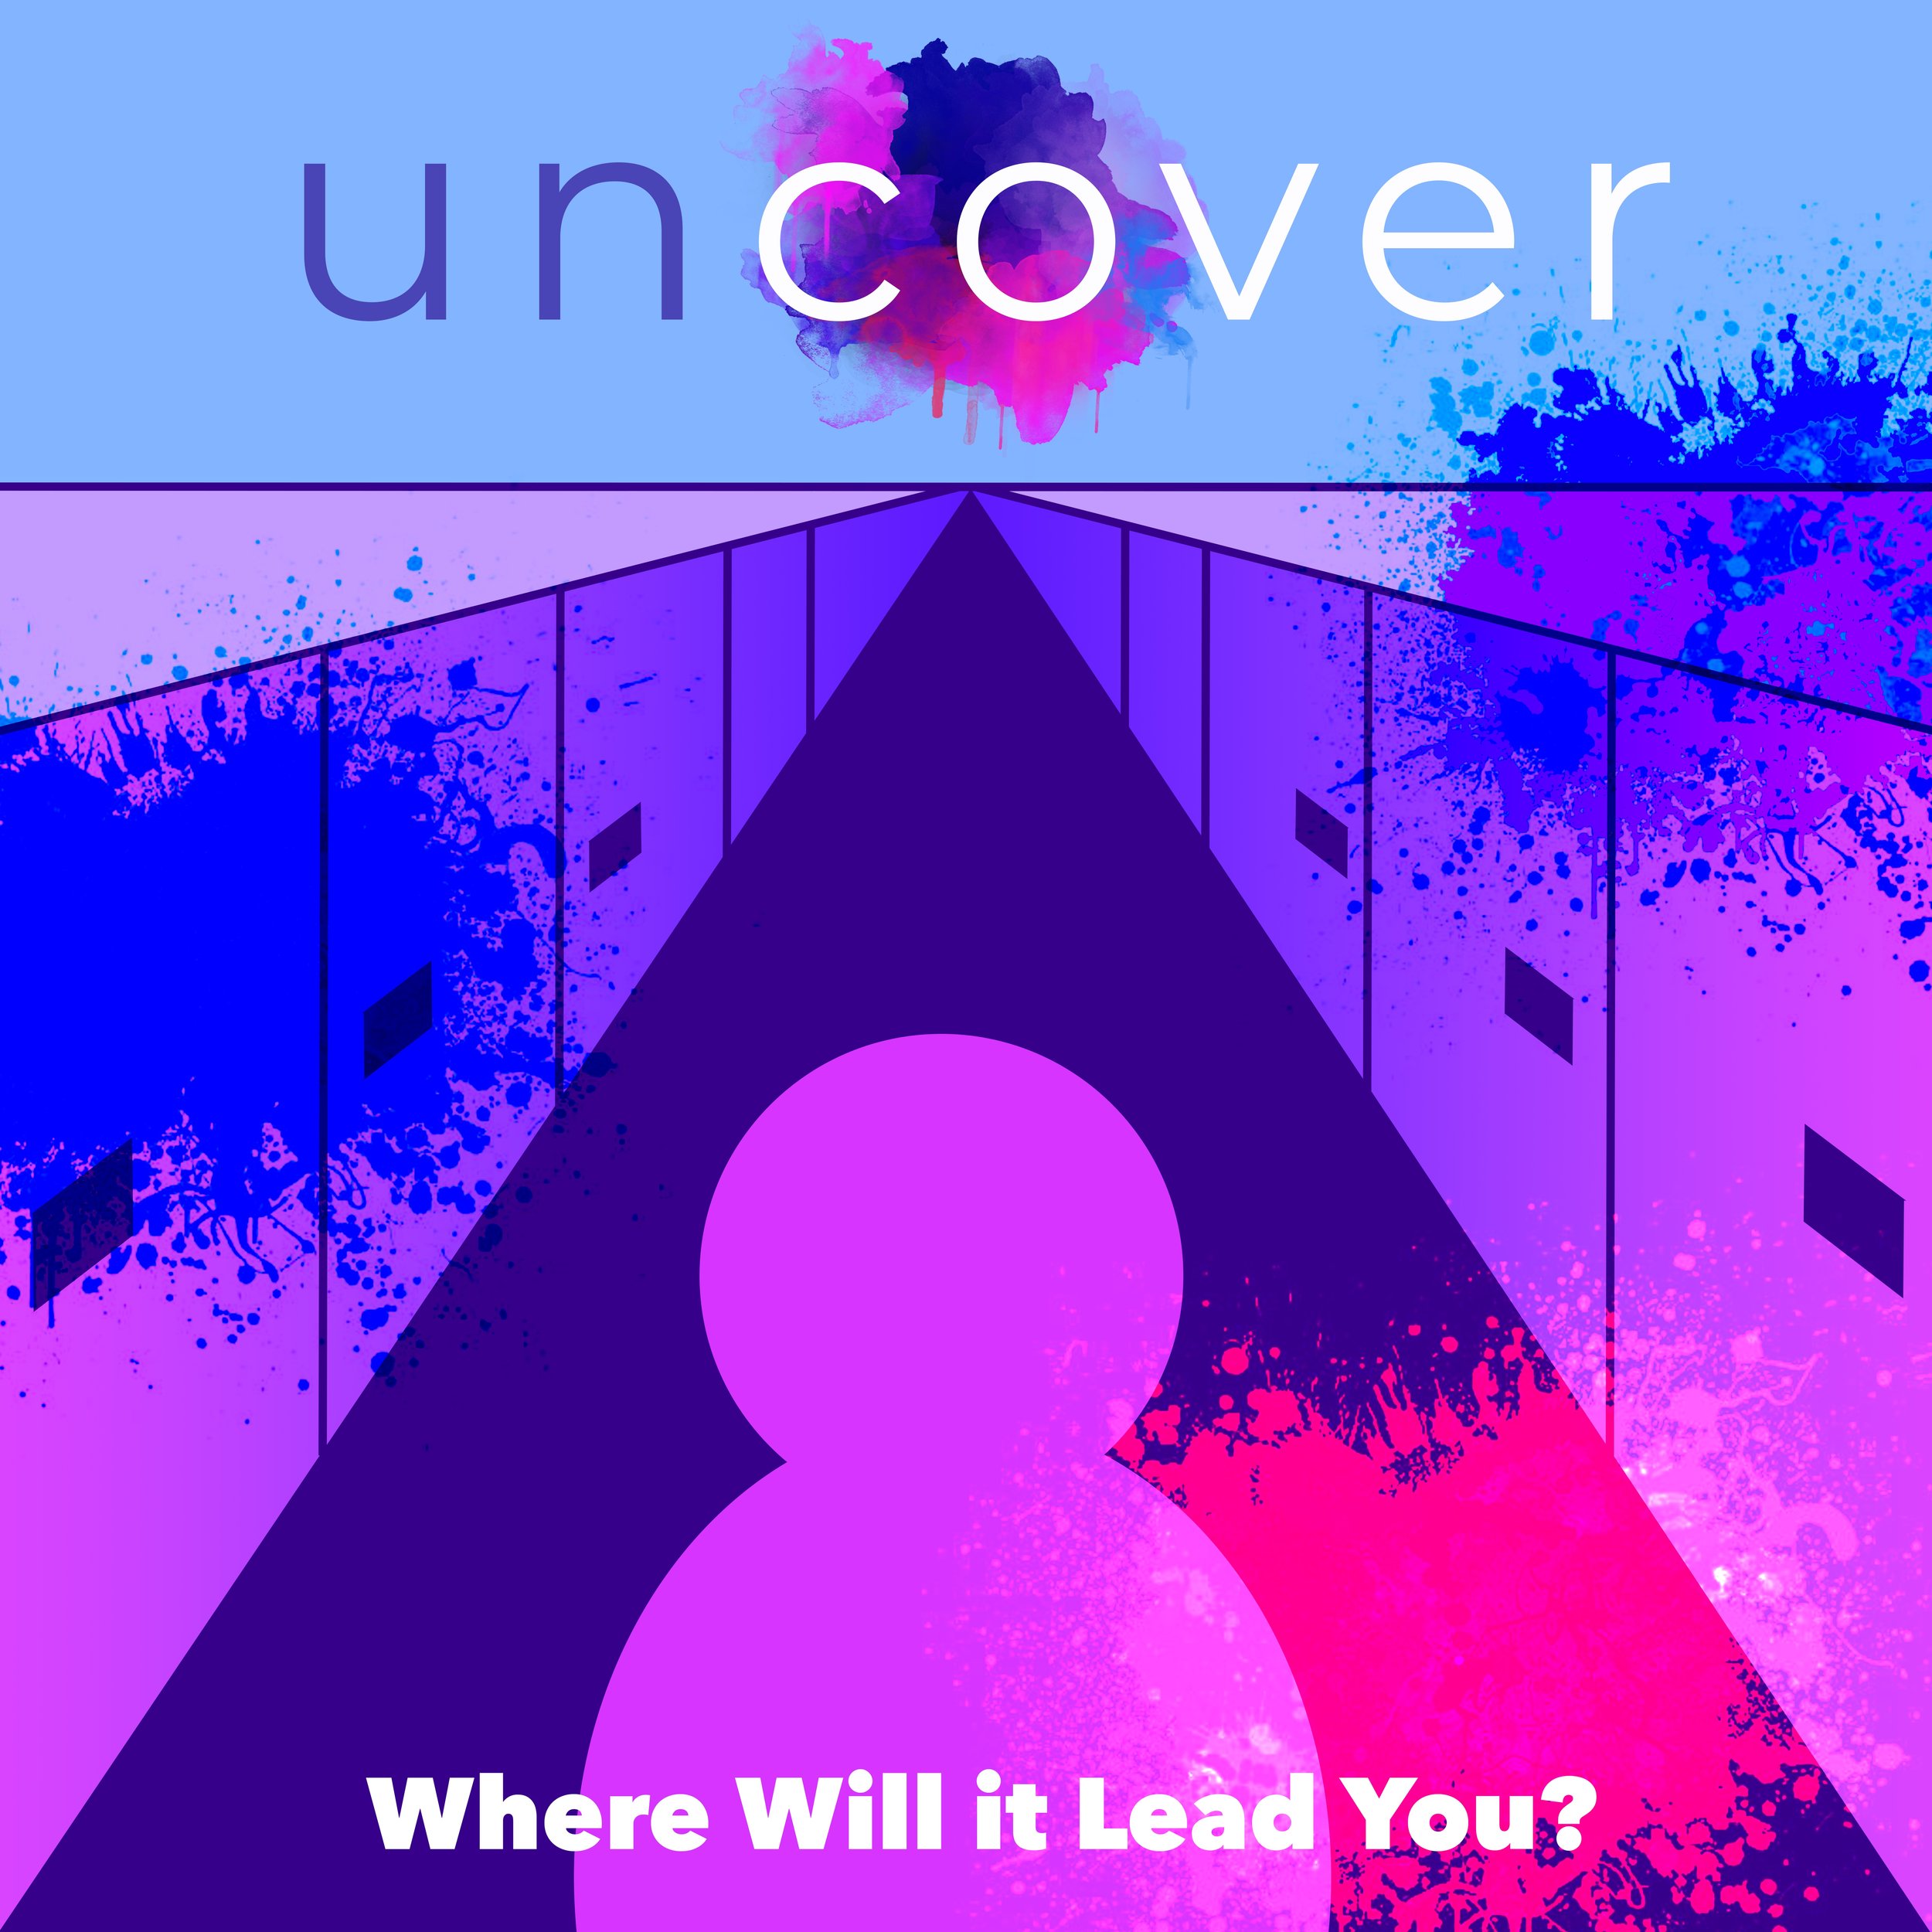 uncover poster.jpg